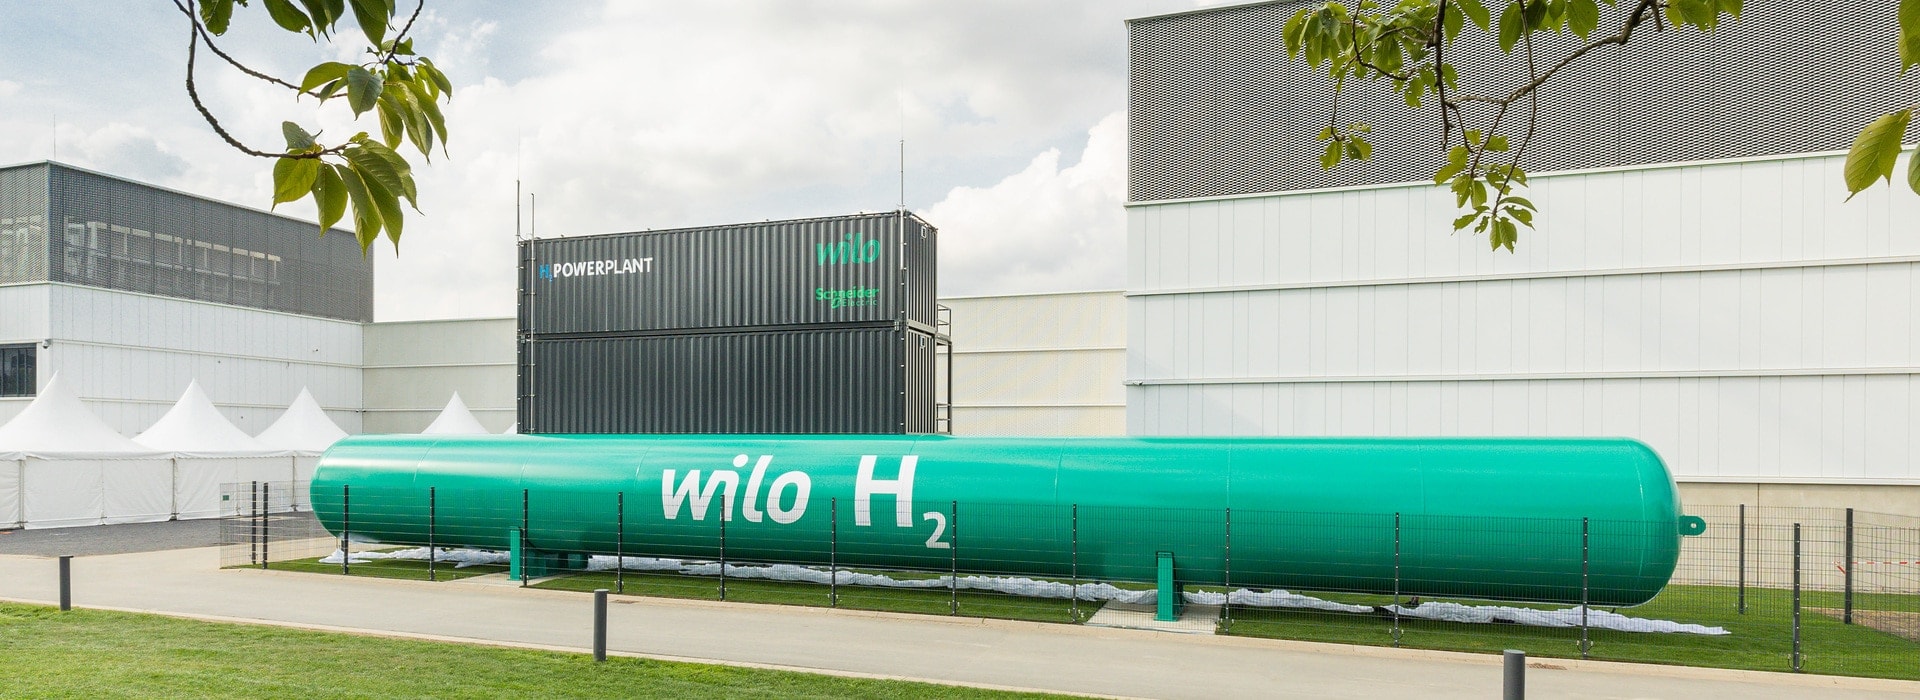 The H2 Powerplant at Wilopark has been officialy revealed.